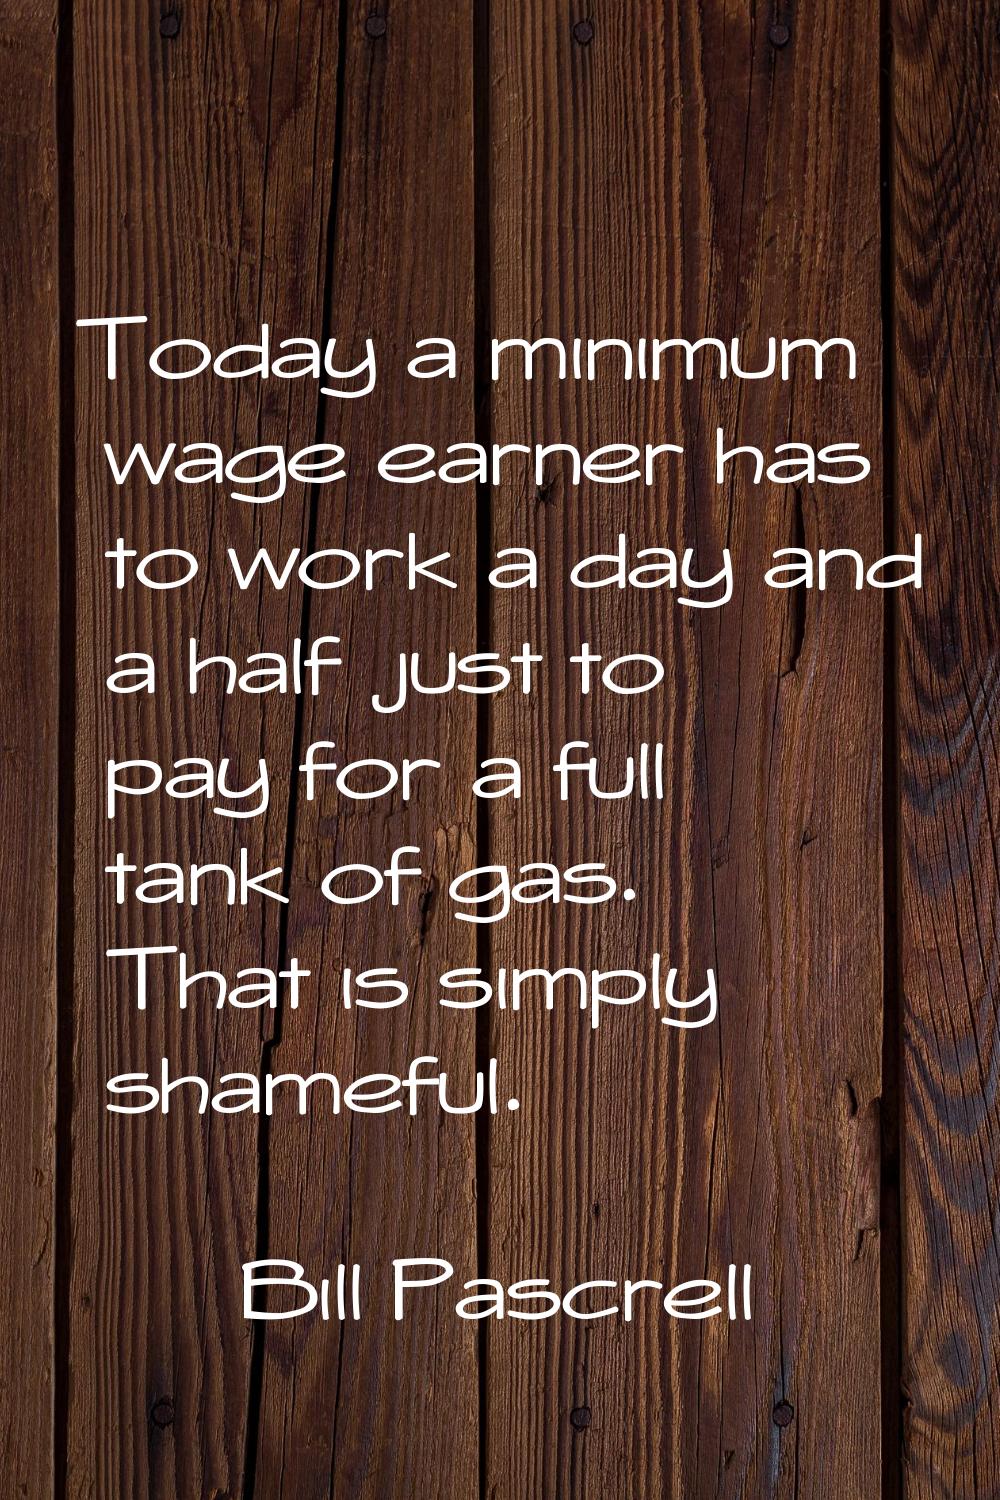 Today a minimum wage earner has to work a day and a half just to pay for a full tank of gas. That i